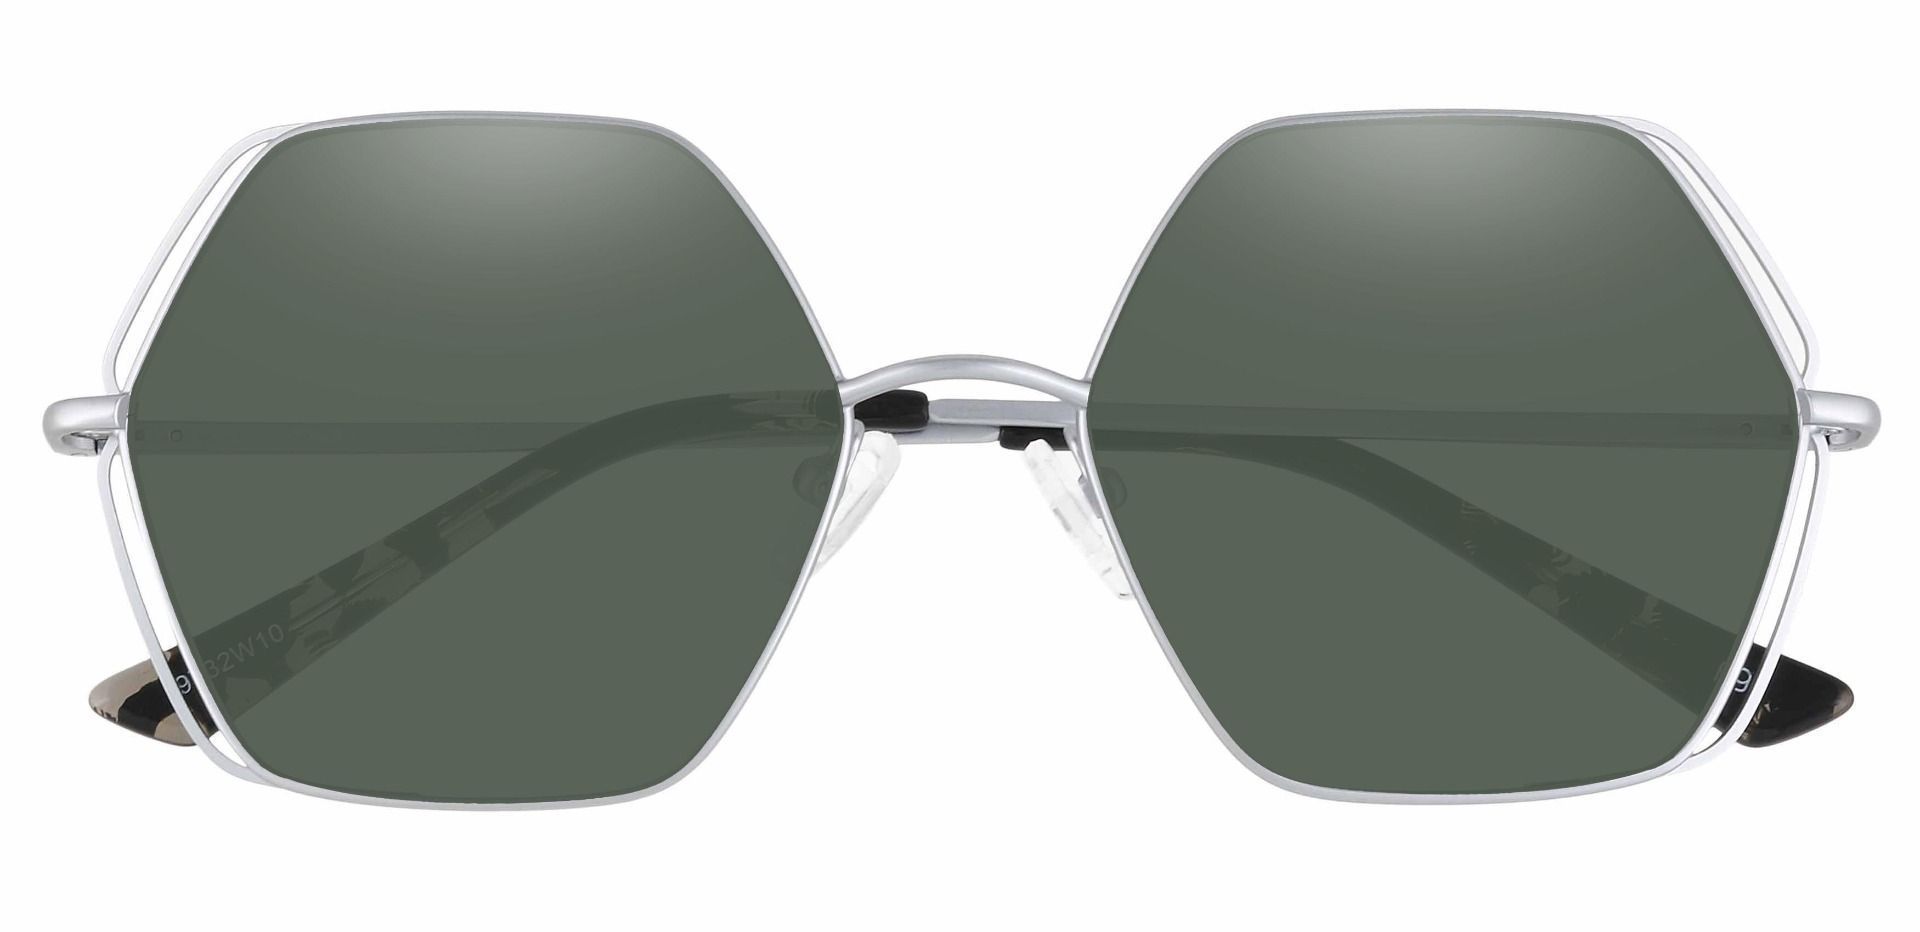 Hawley Geometric Lined Bifocal Sunglasses - Silver Frame With Green Lenses